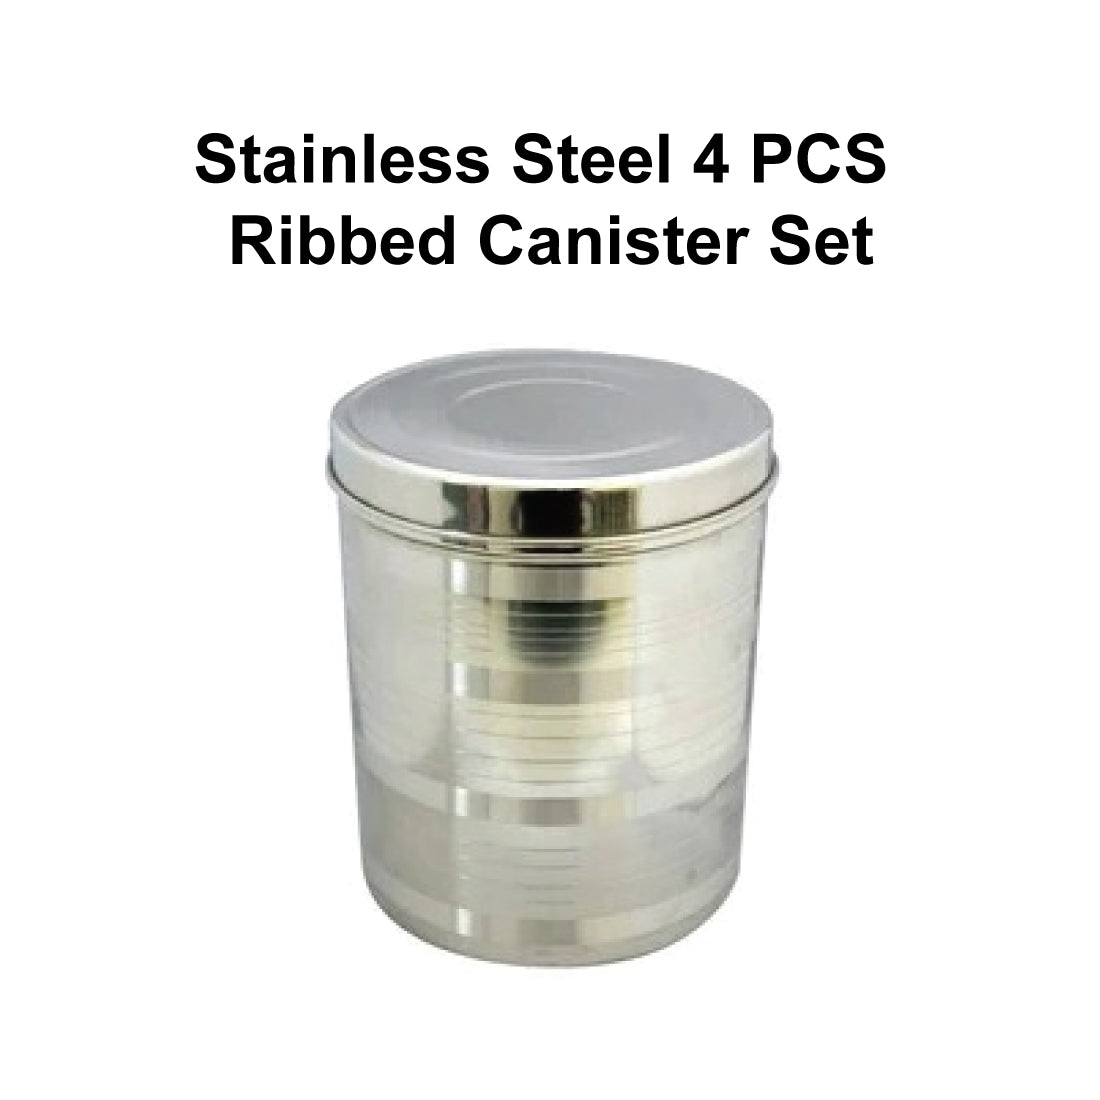 Stainless Steel 4 PCS Ribbed Canister Set